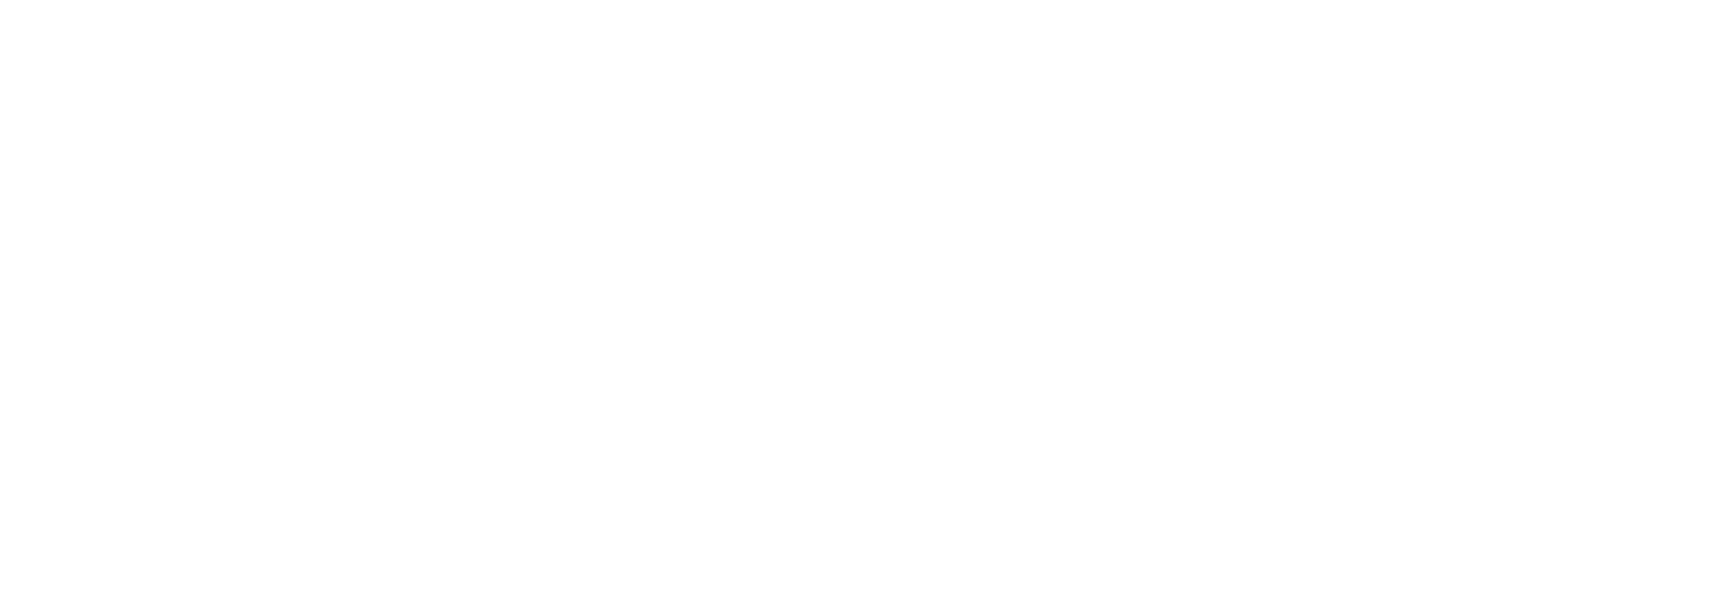 Thank you for your support